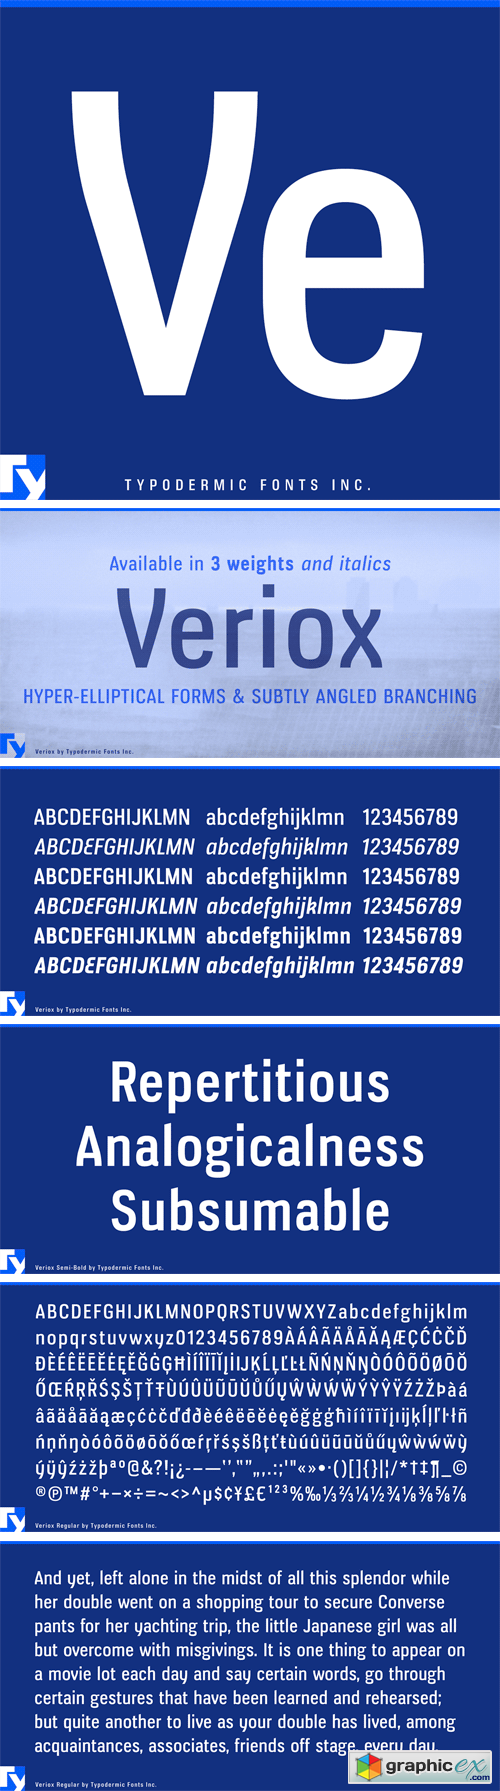 Veriox Font Family